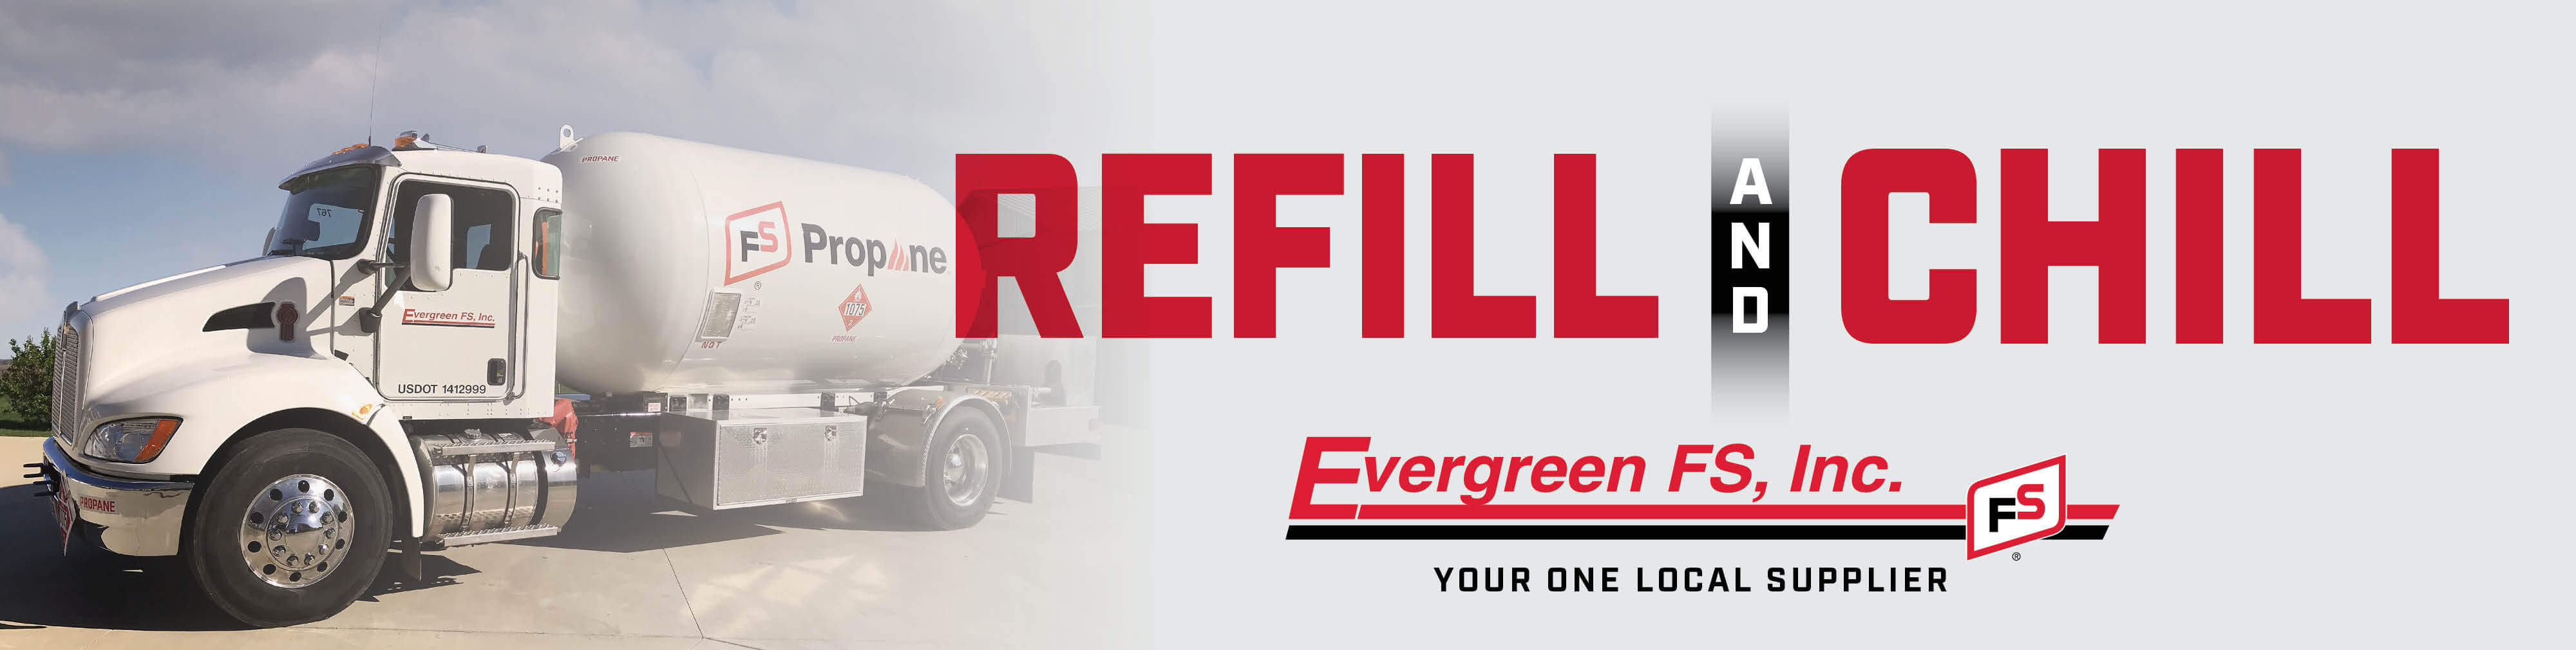 Refill and Chill - Image of a Propane Truck promoting Summer Fill Pricing